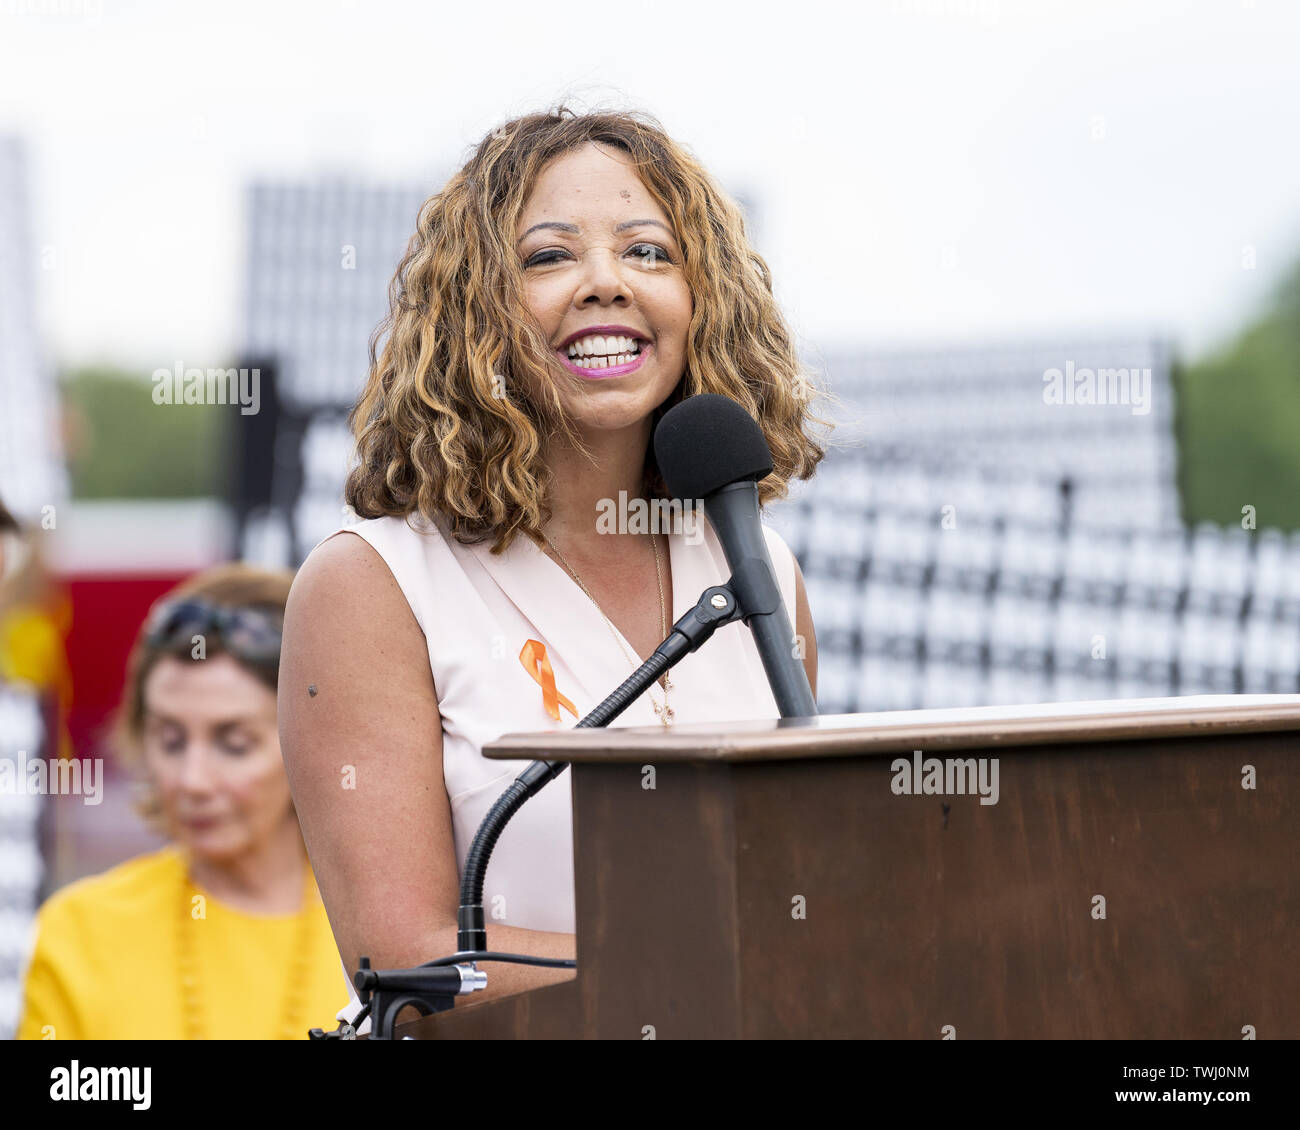 Washington, D.C, USA. 20th June, 2019. U.S. Representative LUCY MCBATH (D-GA) speaking at an event in front of the Capitol to urge the passage of H.R. 8 universal (gun ownership) background checks legislation. Event held on the grass on the eastern side of the U.S. Capitol in Washington, DC on June 20, 2019. Credit: Michael Brochstein/ZUMA Wire/Alamy Live News Stock Photo